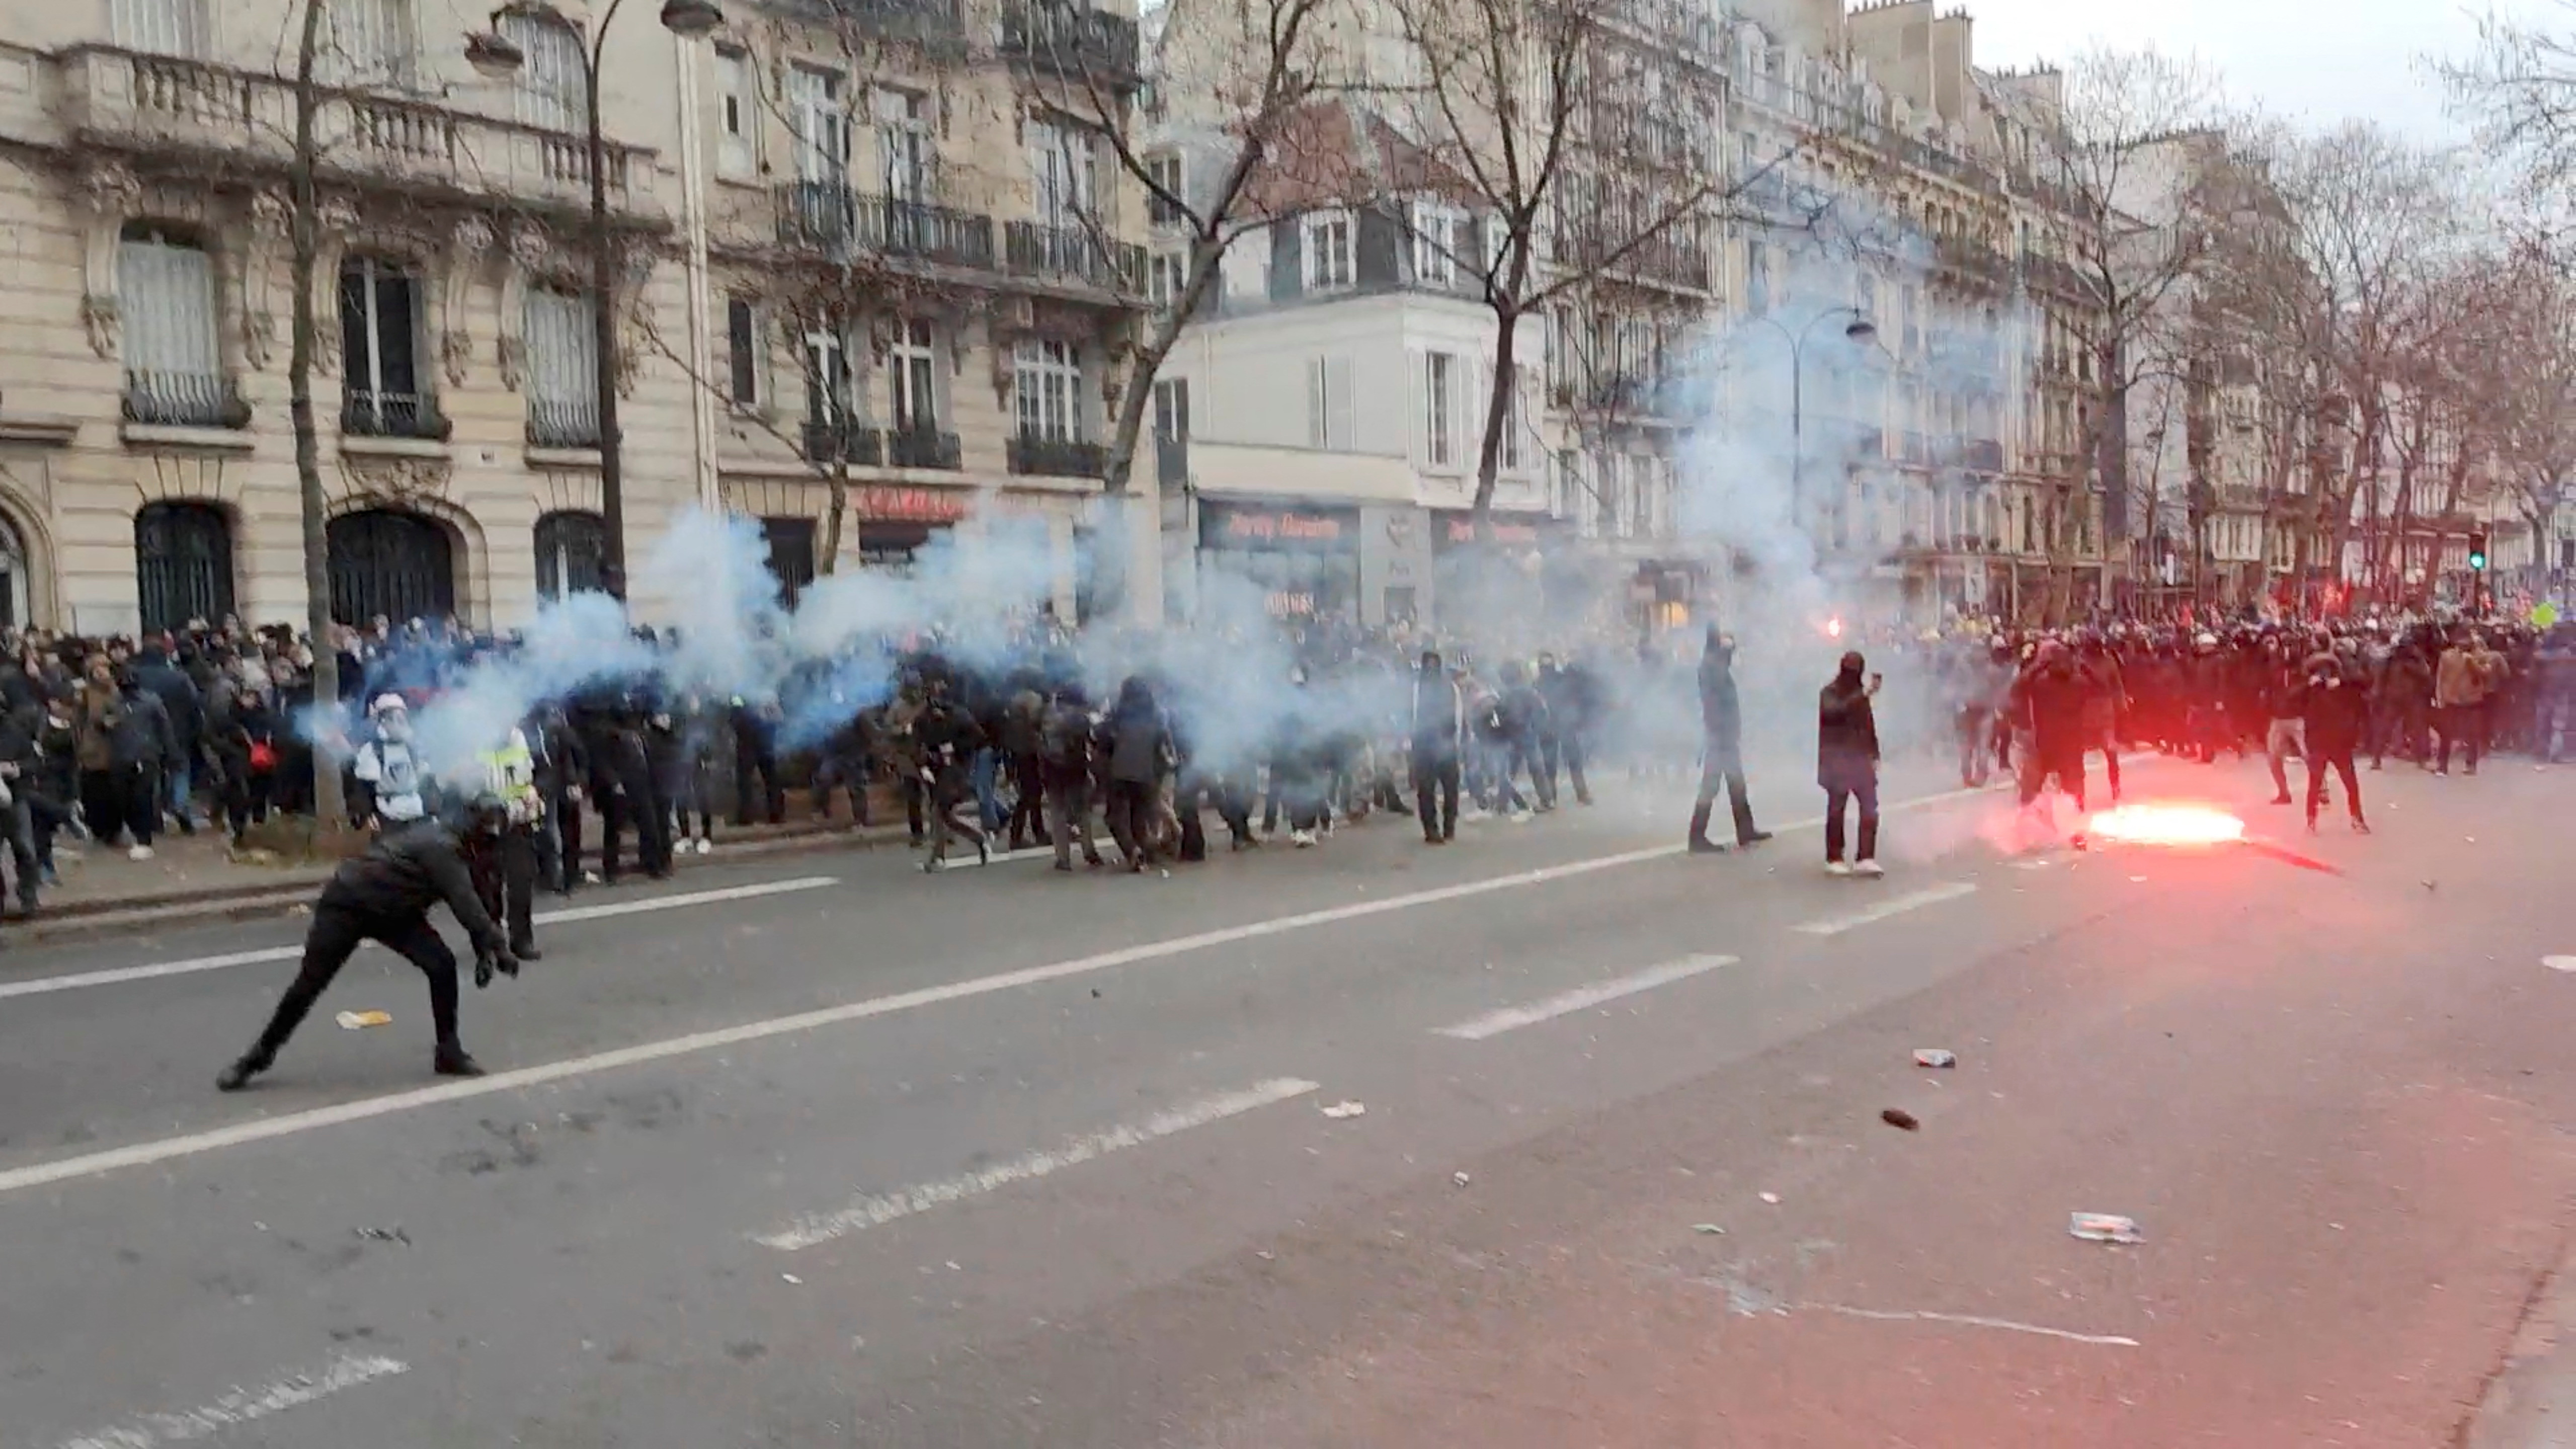 Protesters clash with police in France against pension reform